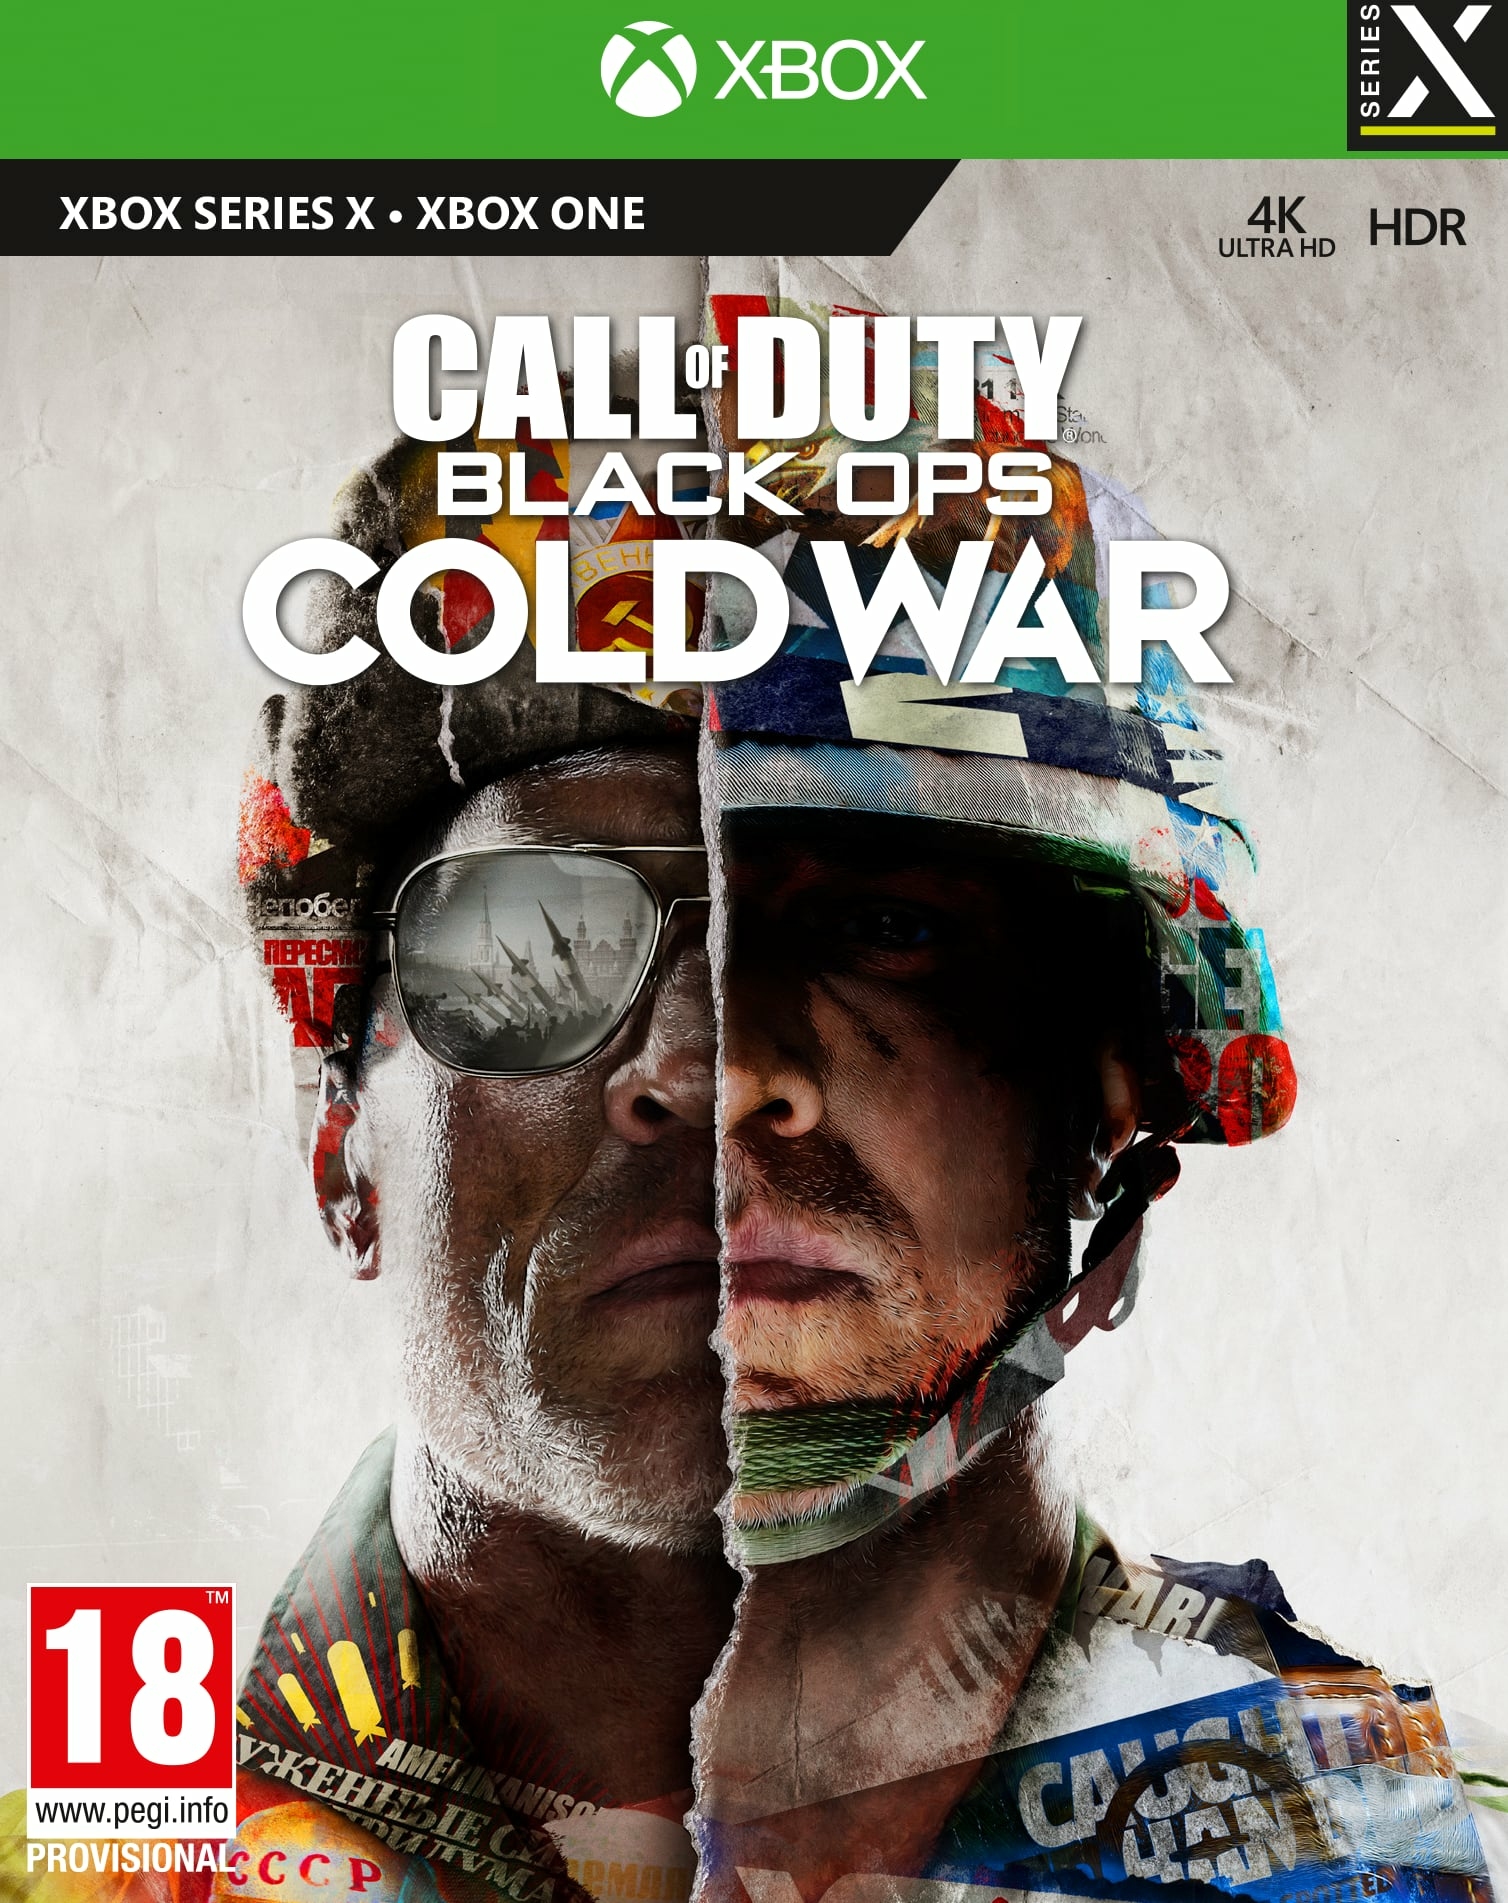 https://www.reference-gaming.com/assets/media/product/109276/call-of-duty-black-ops-cold-war-jeux-xbox-series-x-5f48a47398307.jpg?format=product-cover-large&k=1598596211